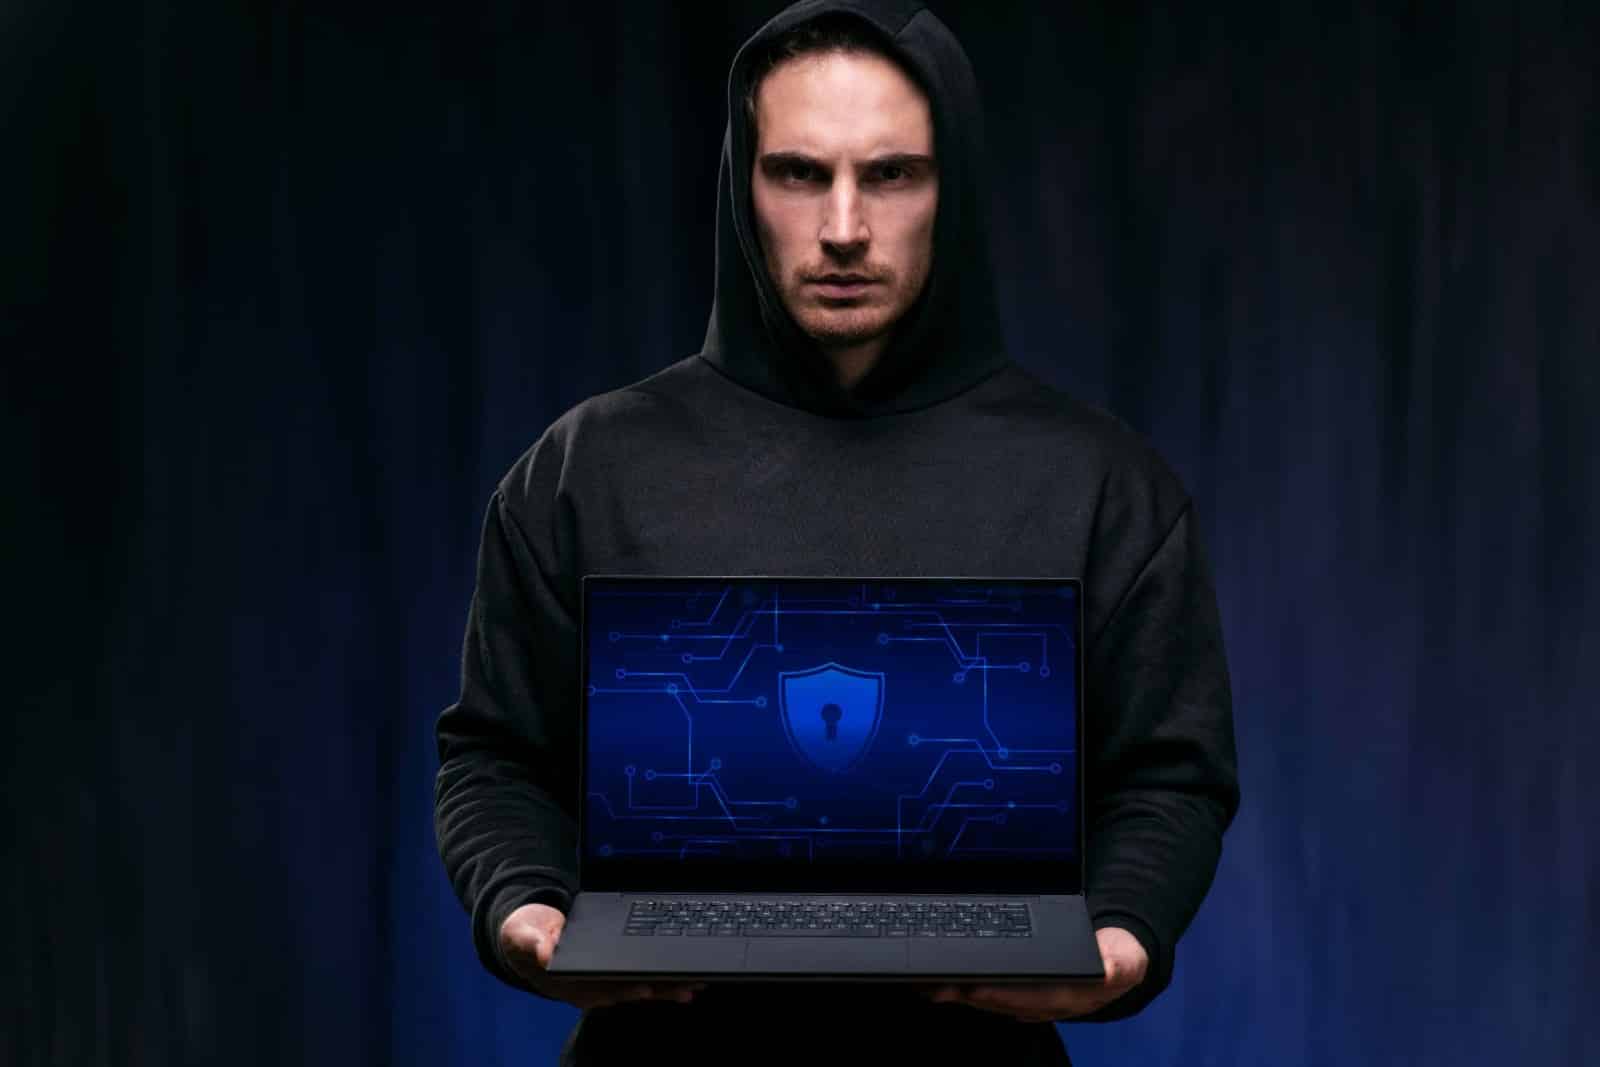 The mission of cybersecurity experts is to counter and enhance security systems in advance to defend against/prevent attacks by hackers. These experts are often referred to as 'white hat hackers'